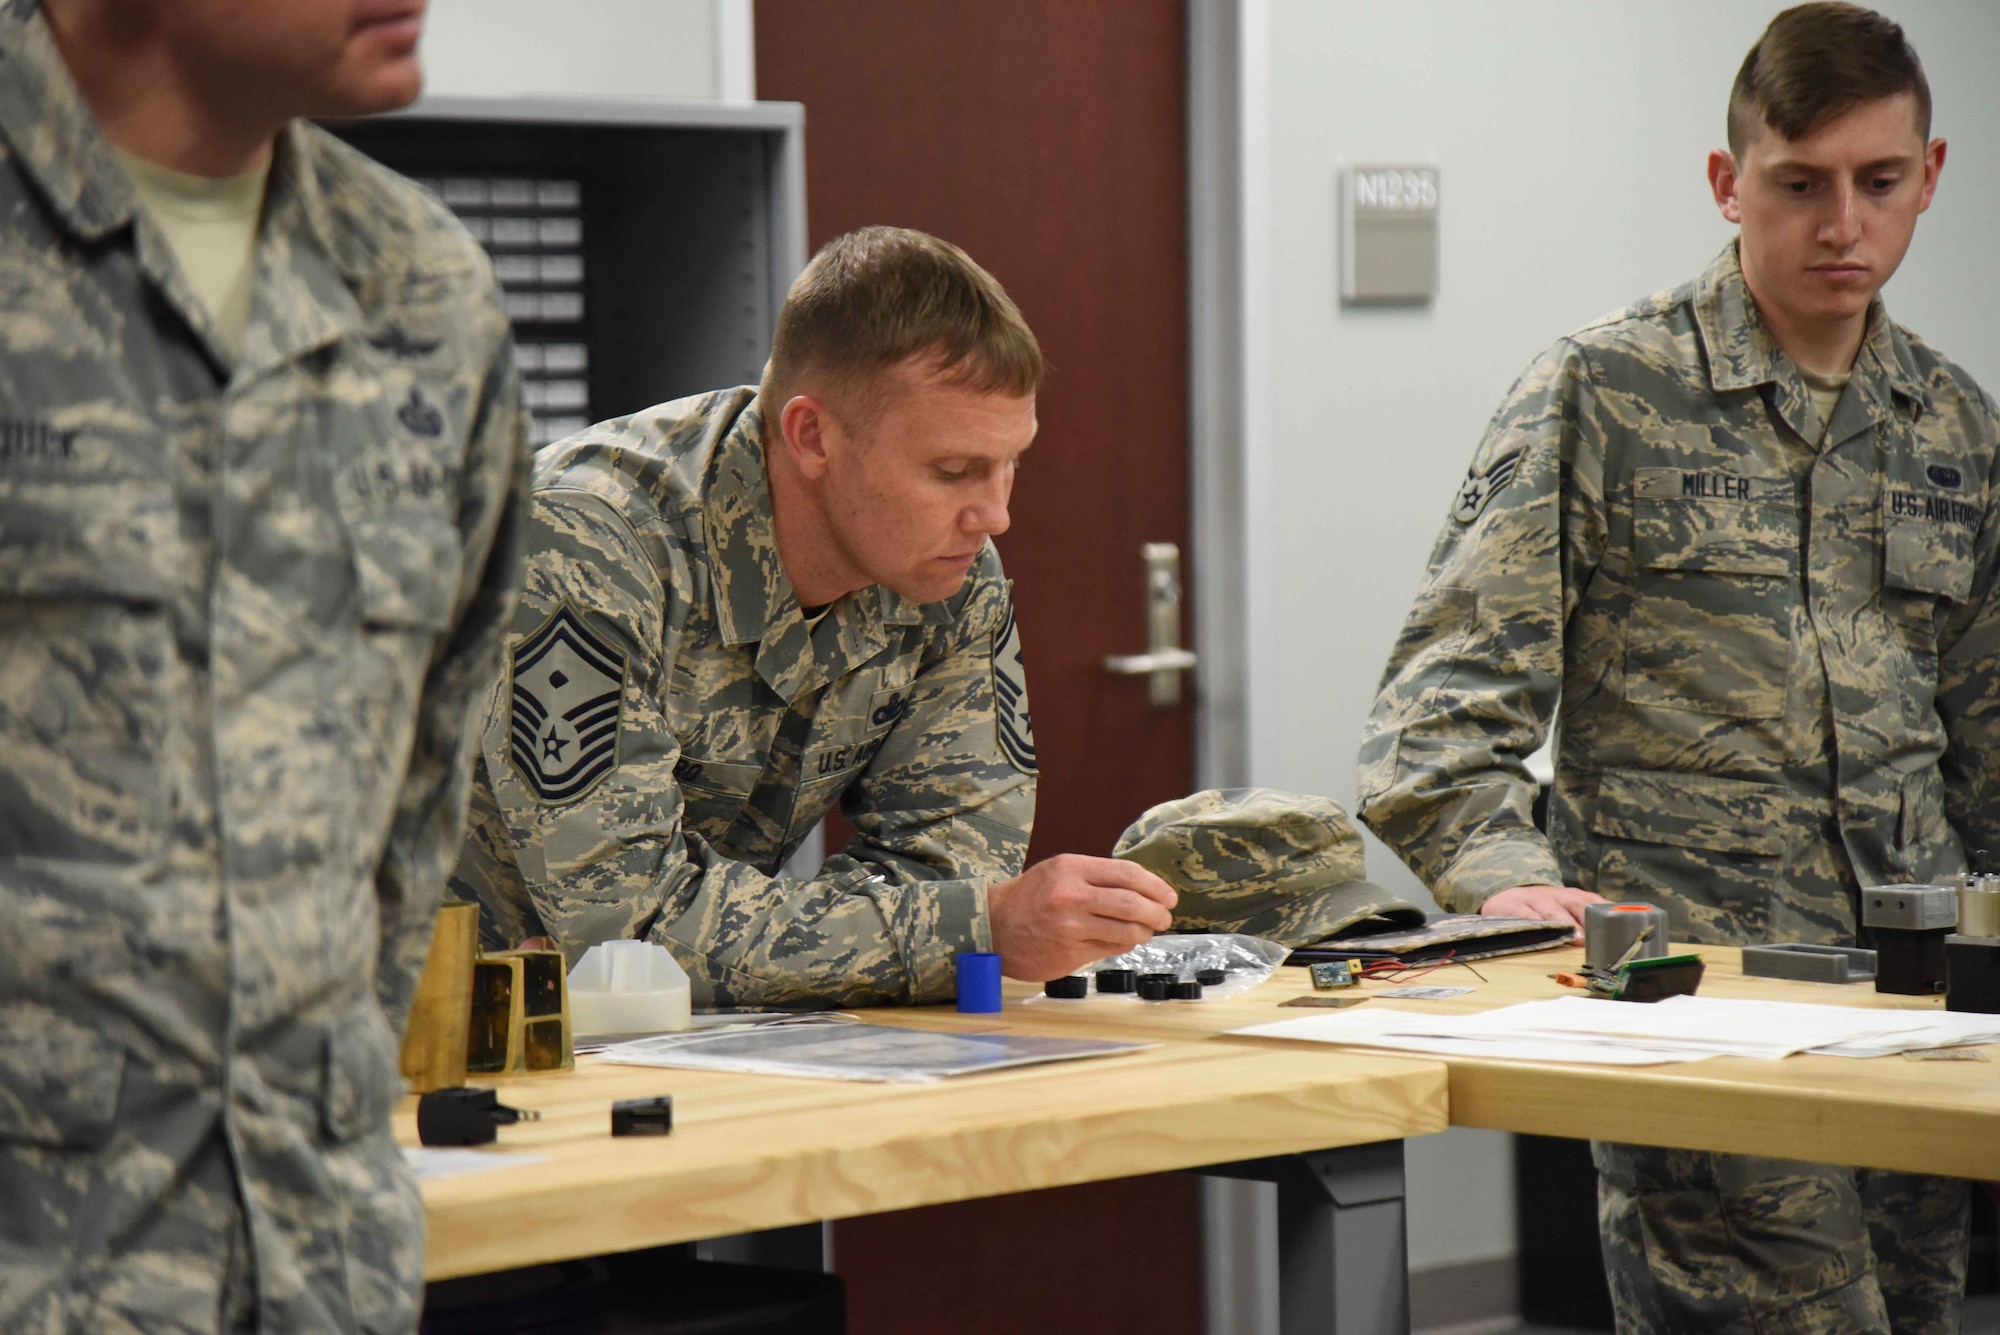 Senior Master Sgt. Scott Gero, a first sergeant at the 363rd Intelligence, Surveillance and Reconnaissance Wing, Langley AFB, Va., looks over some projects produced by members of the Air Force Technical Applications Center's Innovation Lab during a visit June 1, 2018.  Gero, along with 35 other Airmen across the Air Force ISR enterprise, visited the nuclear treaty monitoring center at Patrick AFB, Fla., to learn more about how AFTAC employs innovation to improve mission accomplishment.   (U.S. Air Force photo by Susan A. Romano)